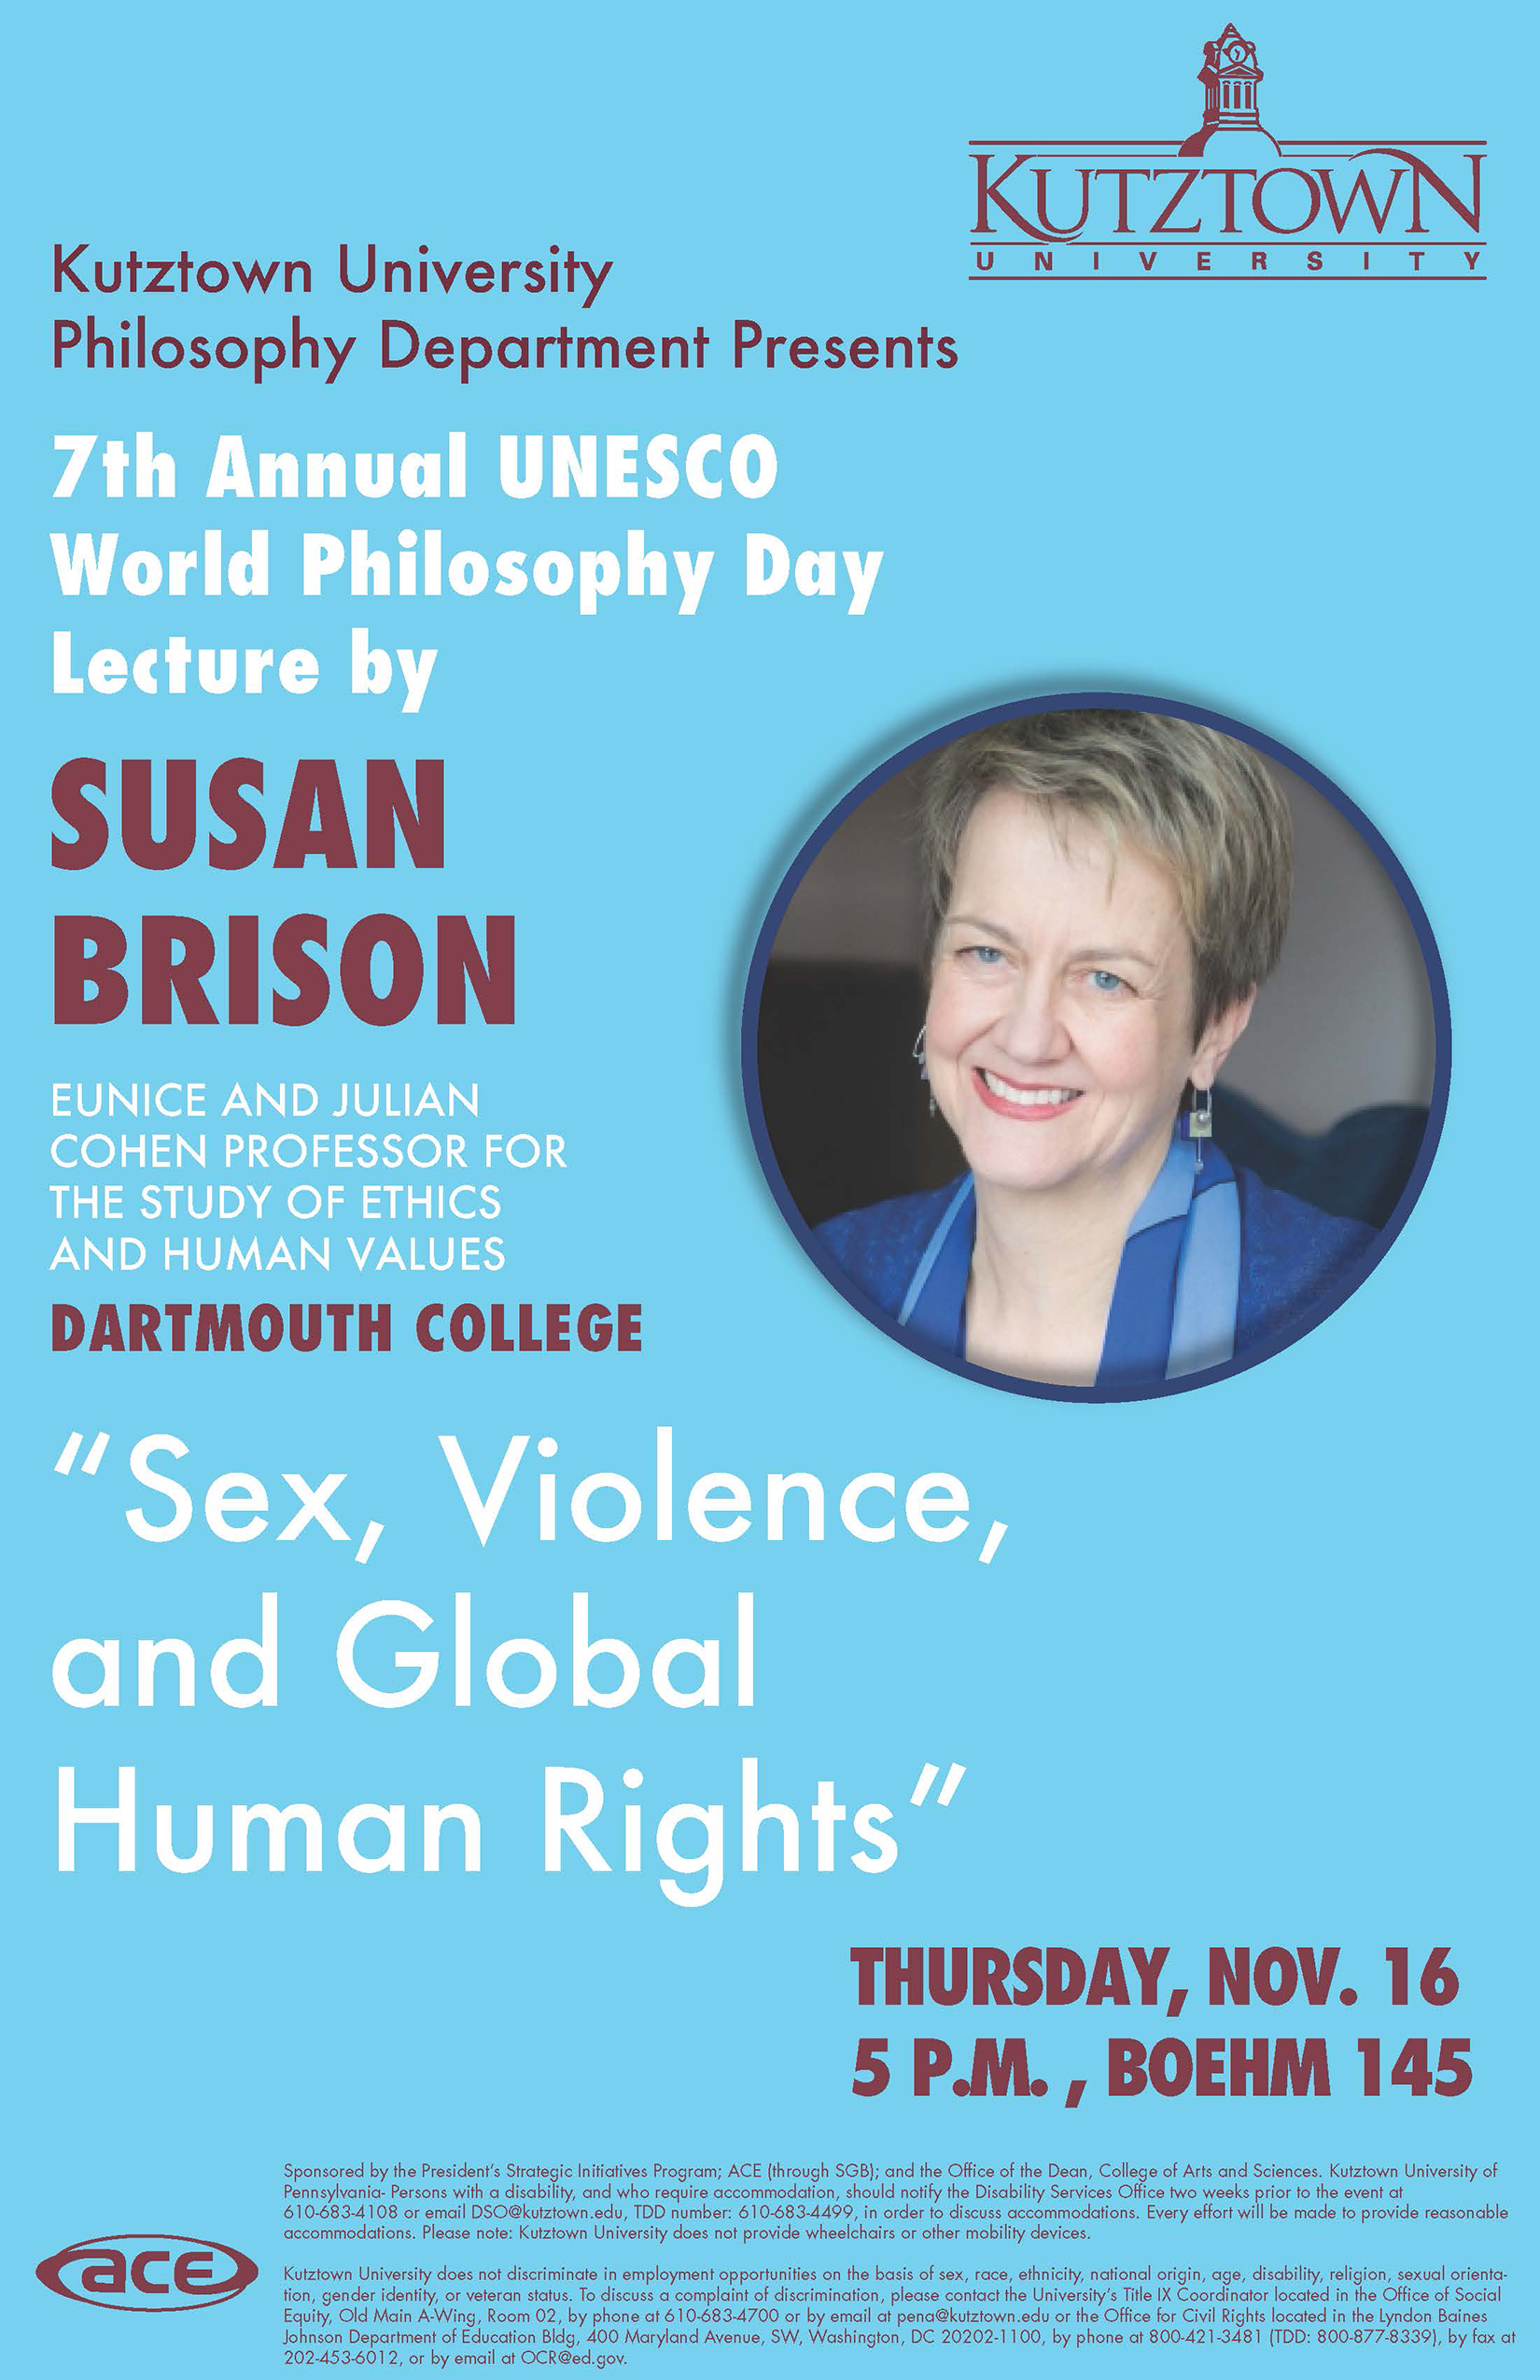 Poster of “7 th Annual UNESCO World Philosophy Day Lecture” by Susan Brison. Topic: “Sex, Violence, and Global Human Rights”. Date: November 16, 2017.